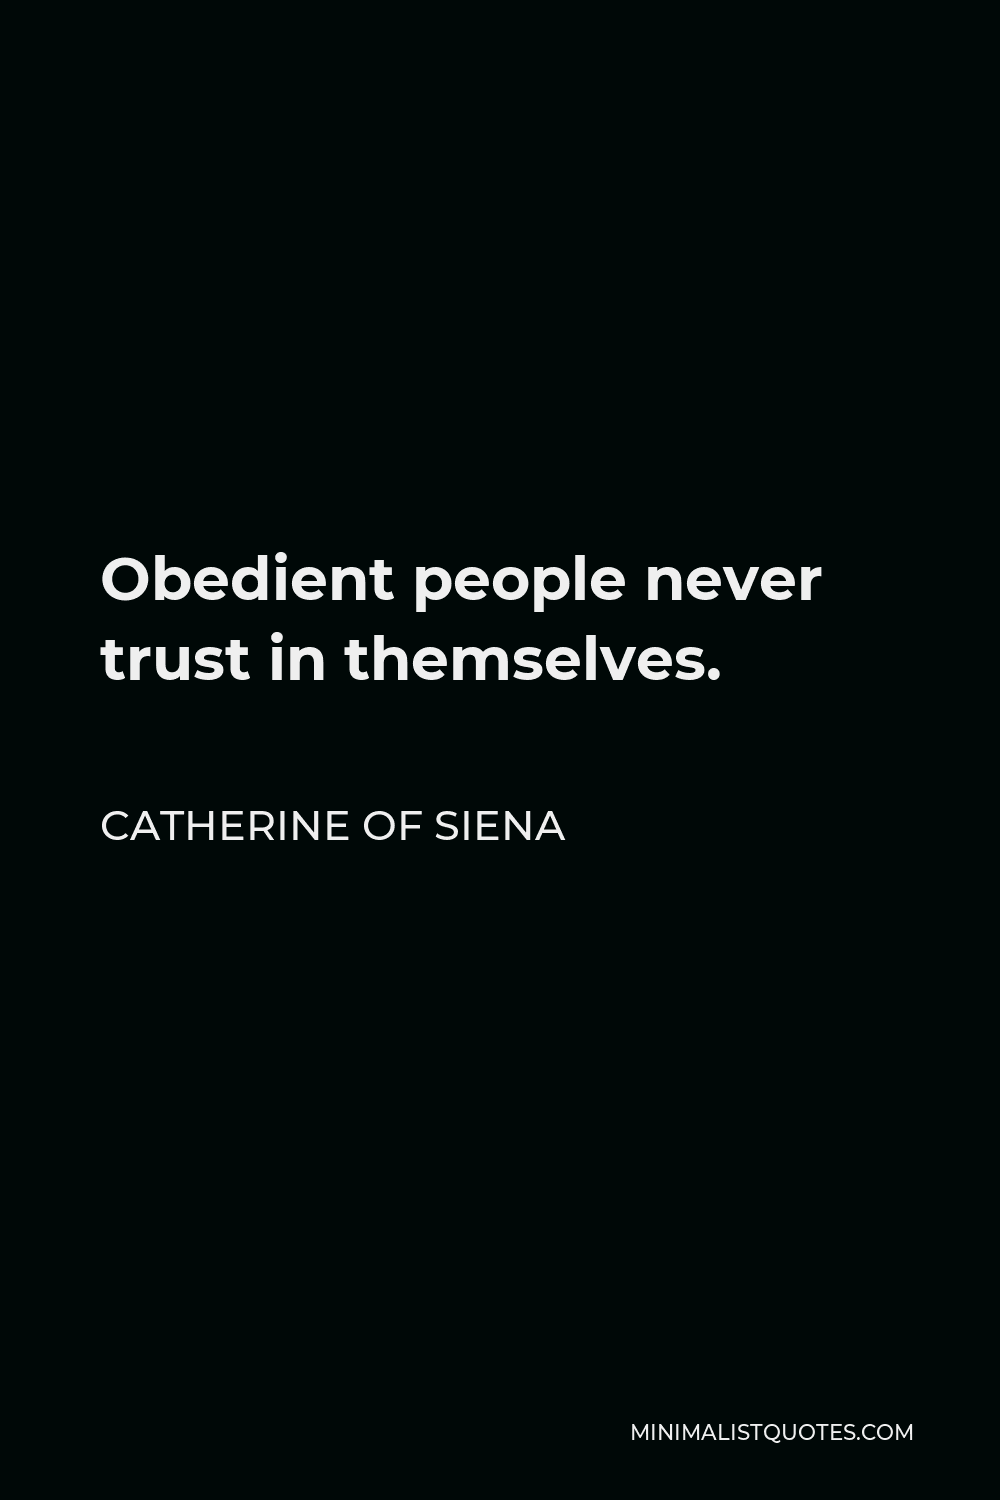 Catherine of Siena Quote - Obedient people never trust in themselves.